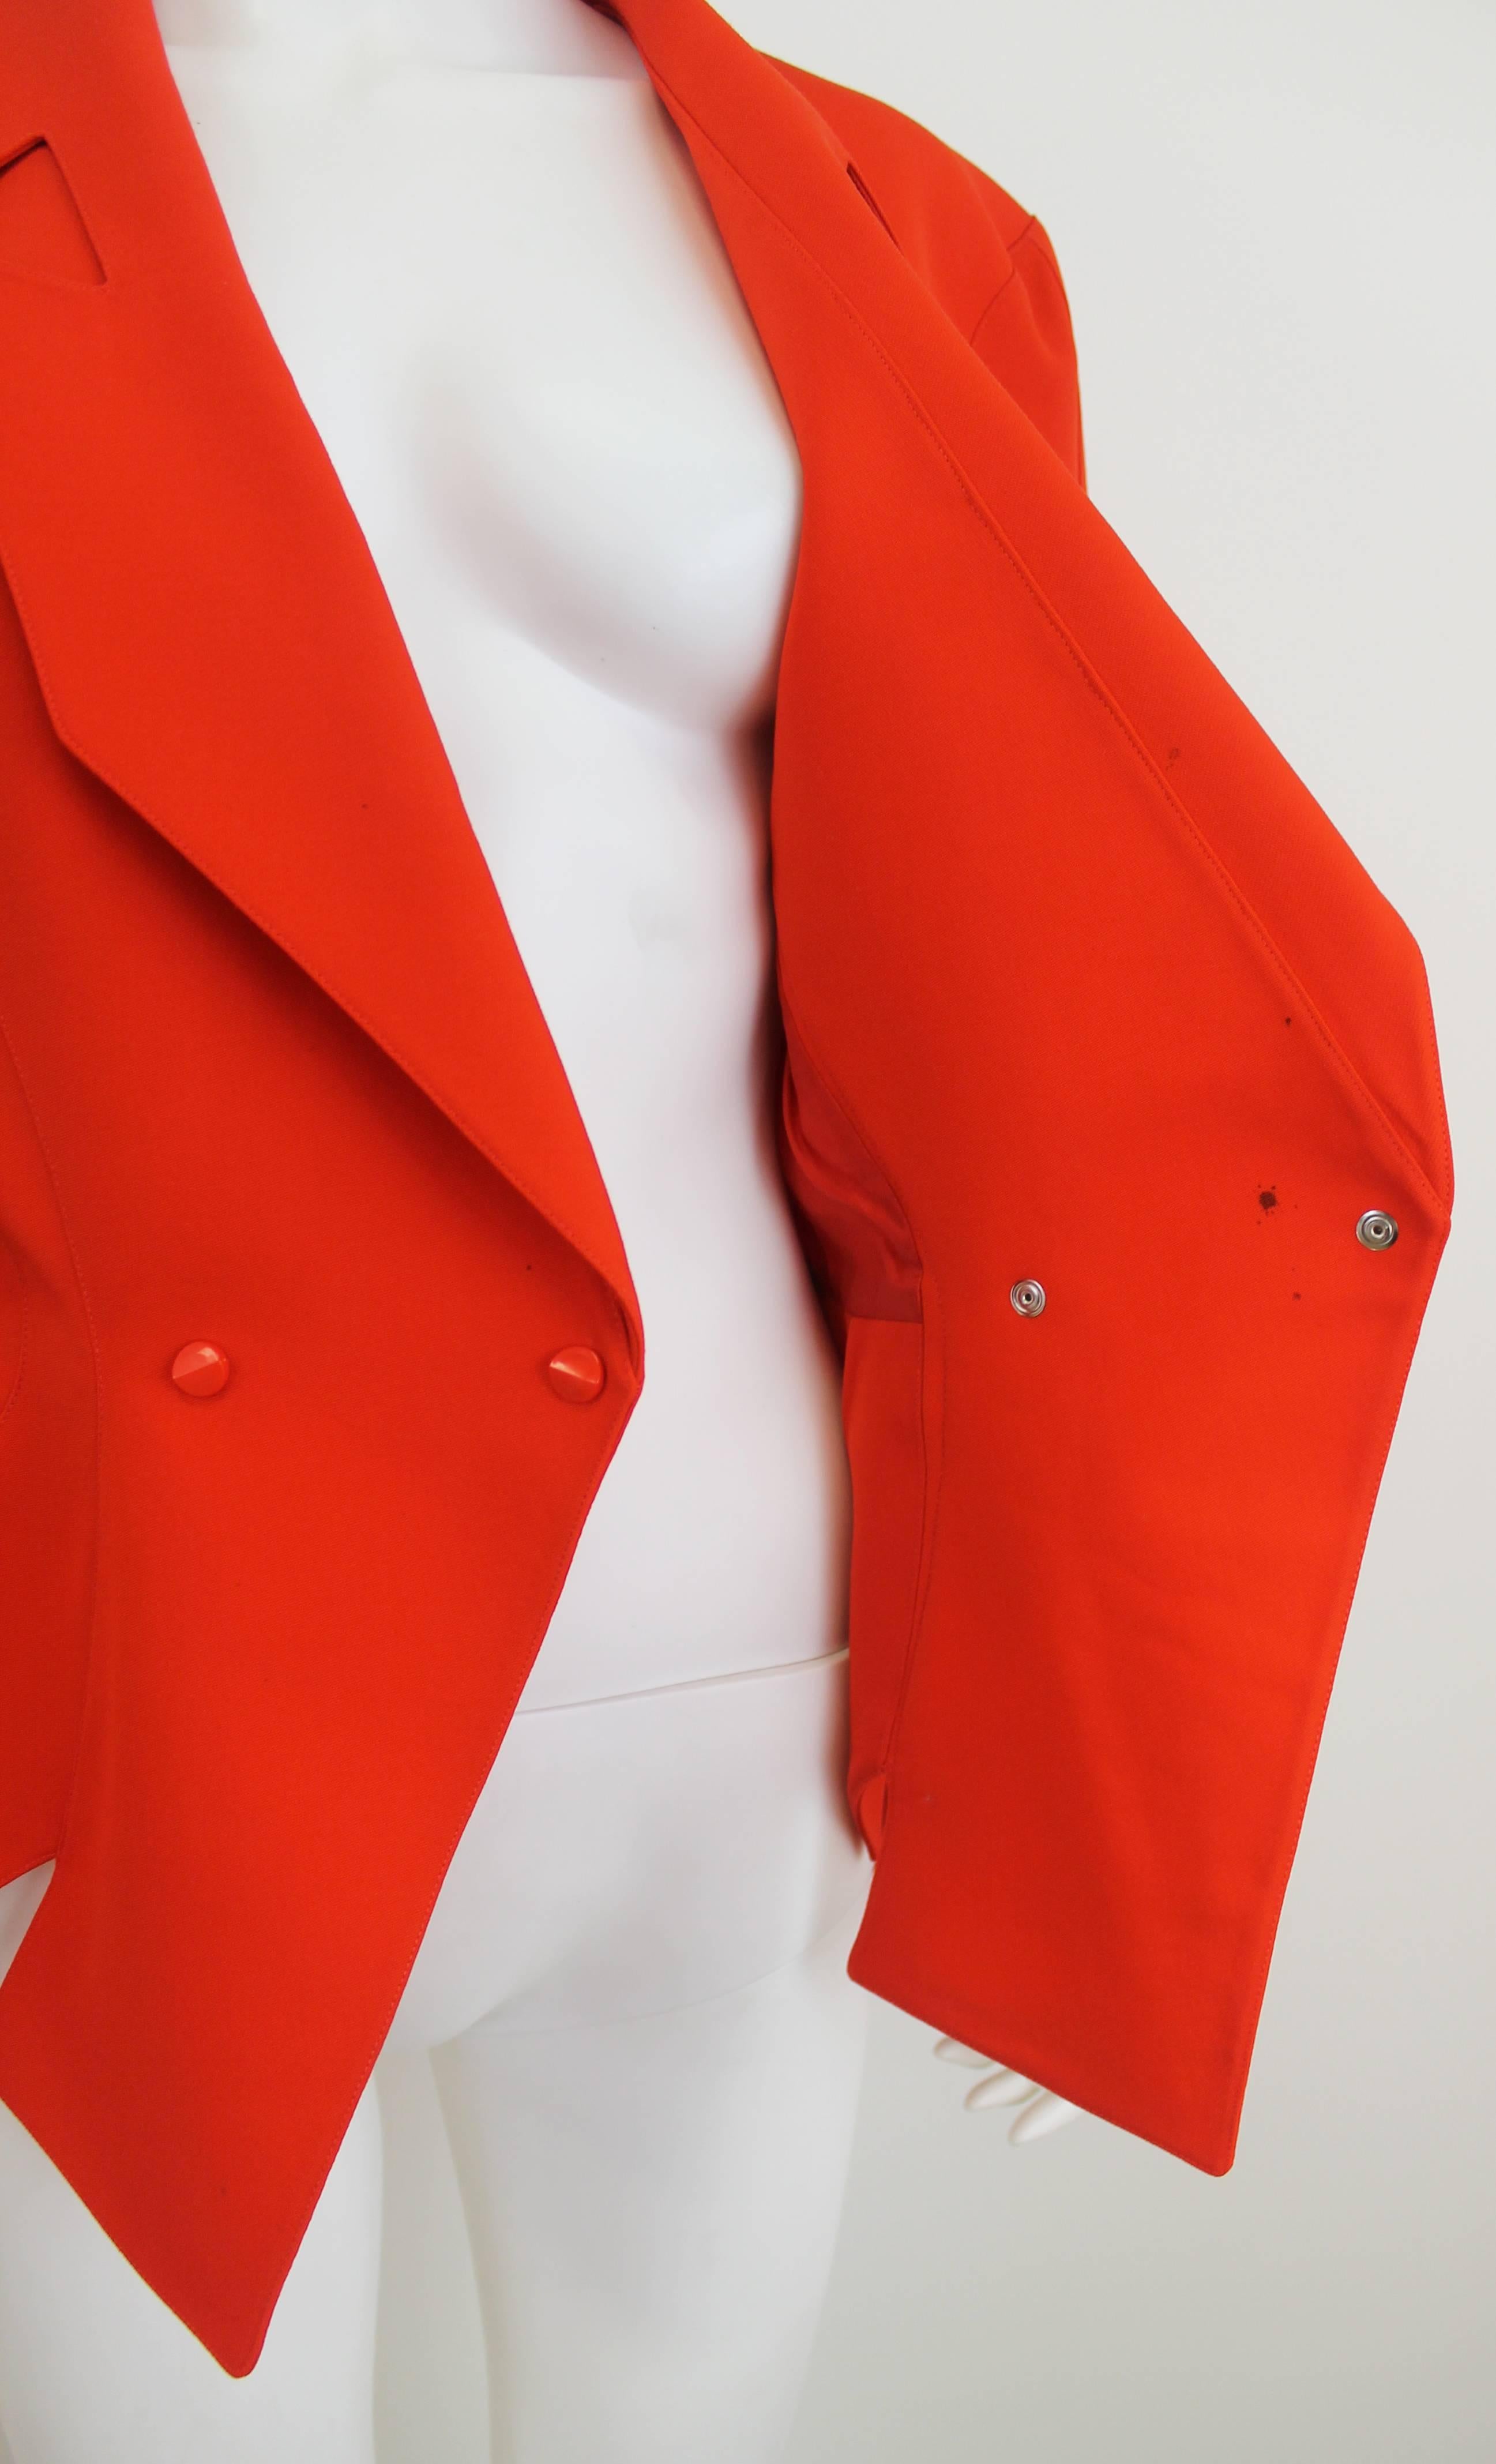 Vintage red Thierry Mugler jacket with M shape cut out on the hem of the jacket and sleeves. Also features cut out detailing along the lapel. 